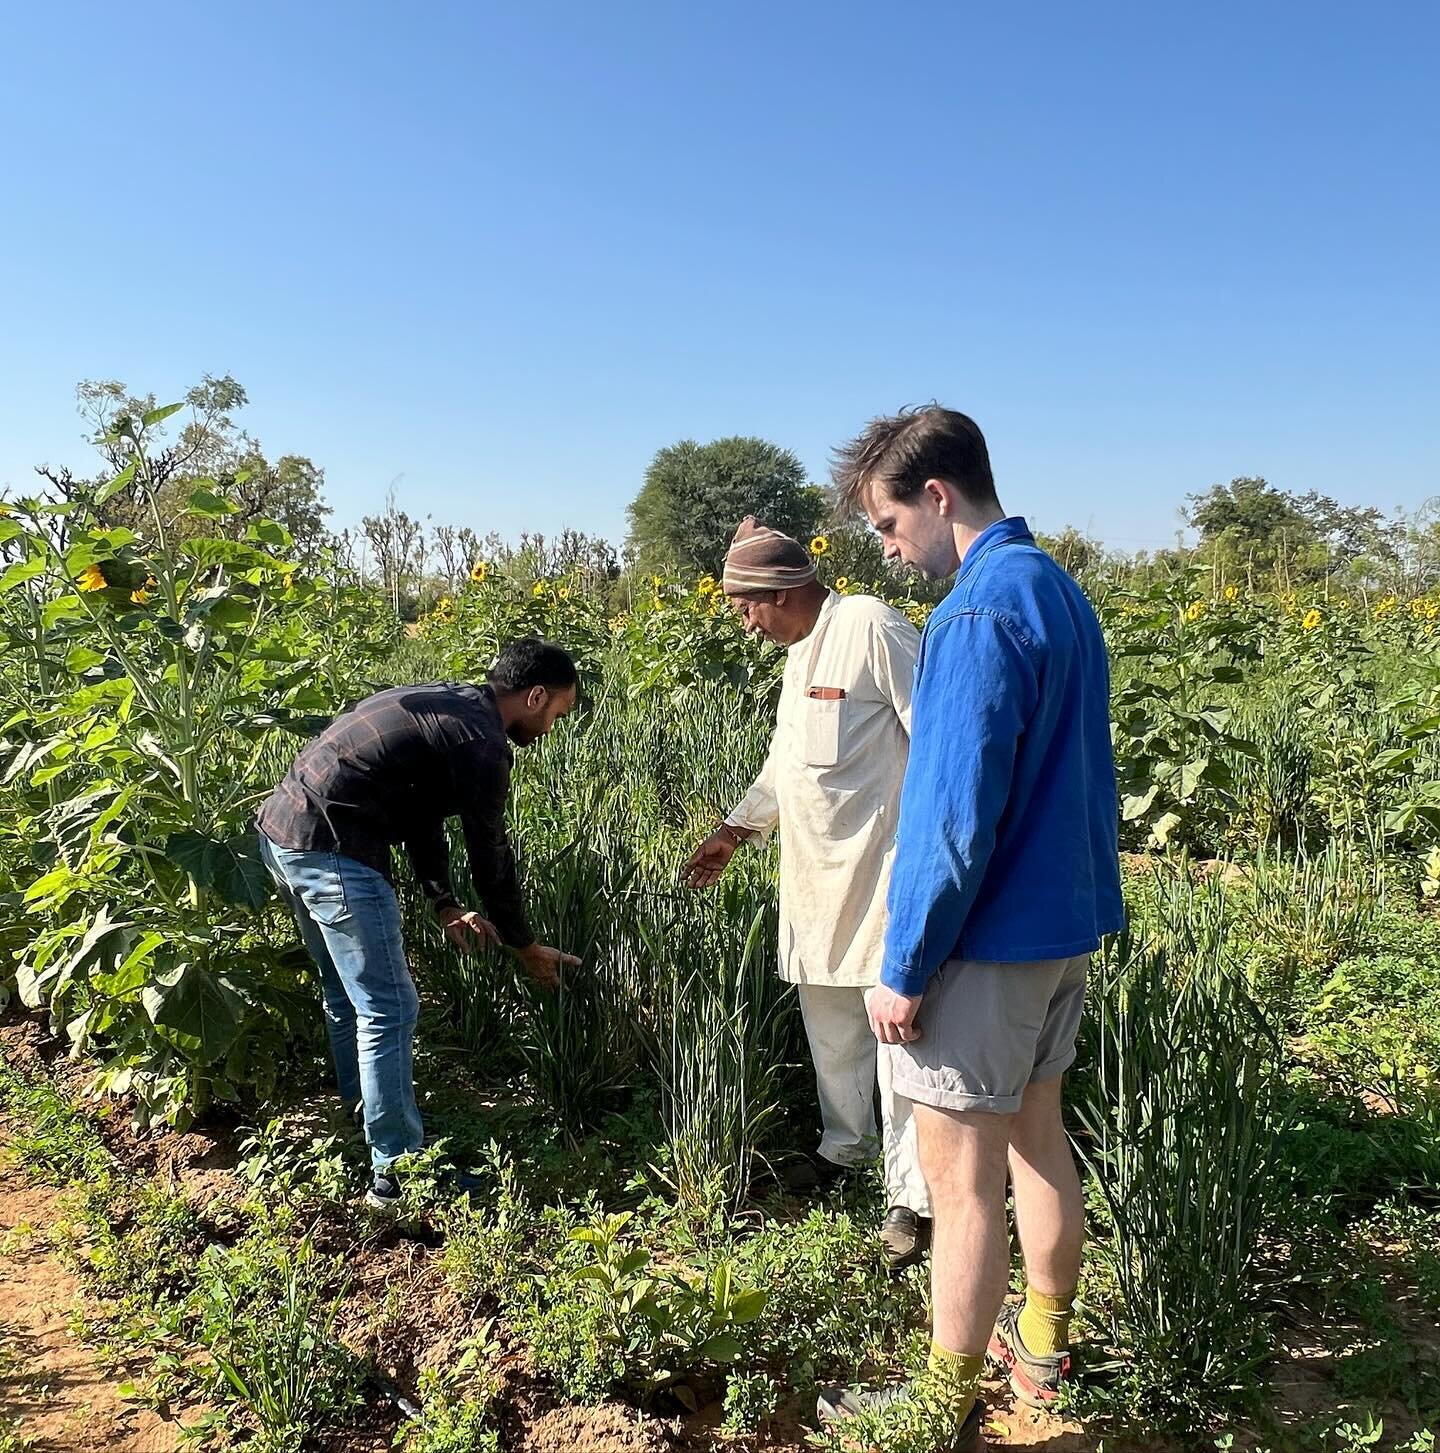 When you start a new job and your first work week takes you to INDIA to visit regenerative farms and meet farmers and new colleagues&hellip; It was an inspiring beginning with Materra @materra.tech .